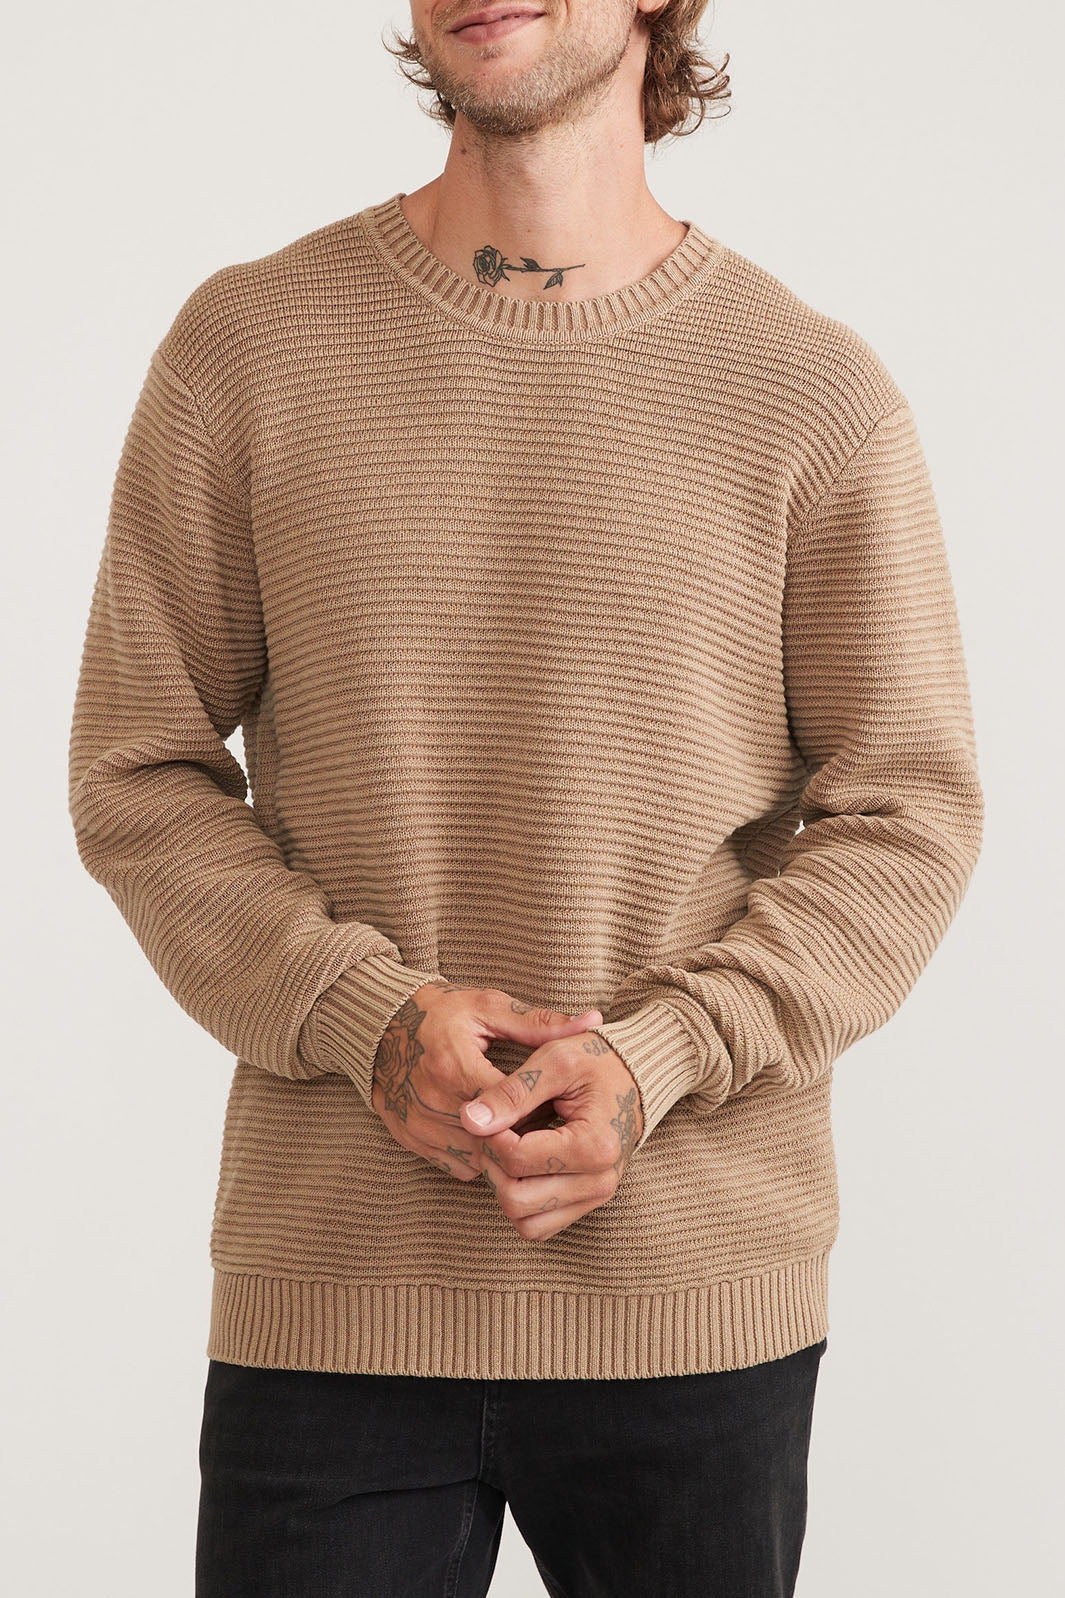 Garment Dye Crew Sweater - Toasted Coconut